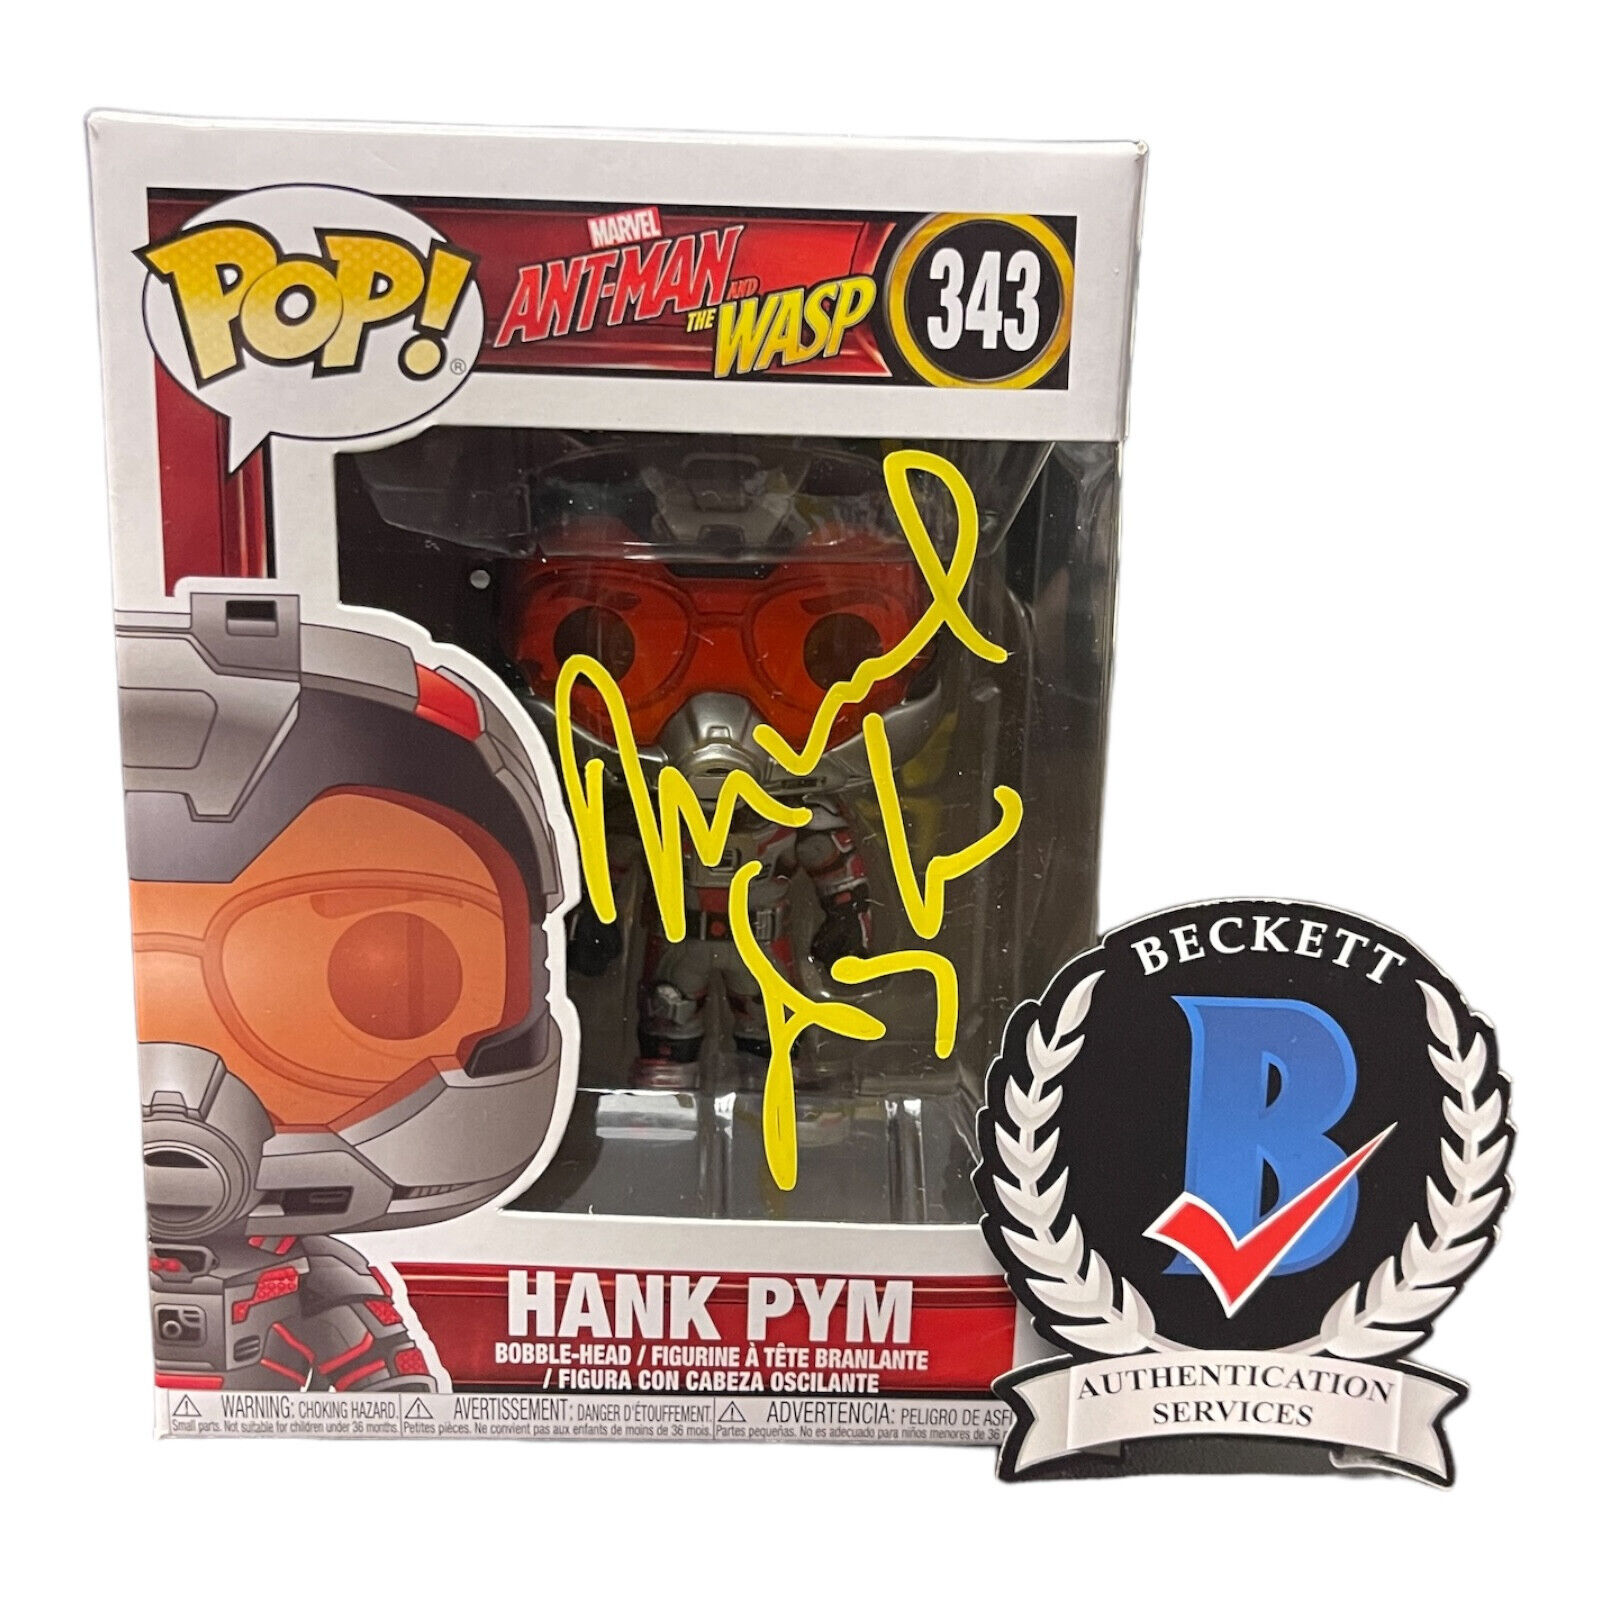 Michael Douglas Signed Auto Hank Pym Funko Pop 343 Beckett Ant-Man And The Wasp